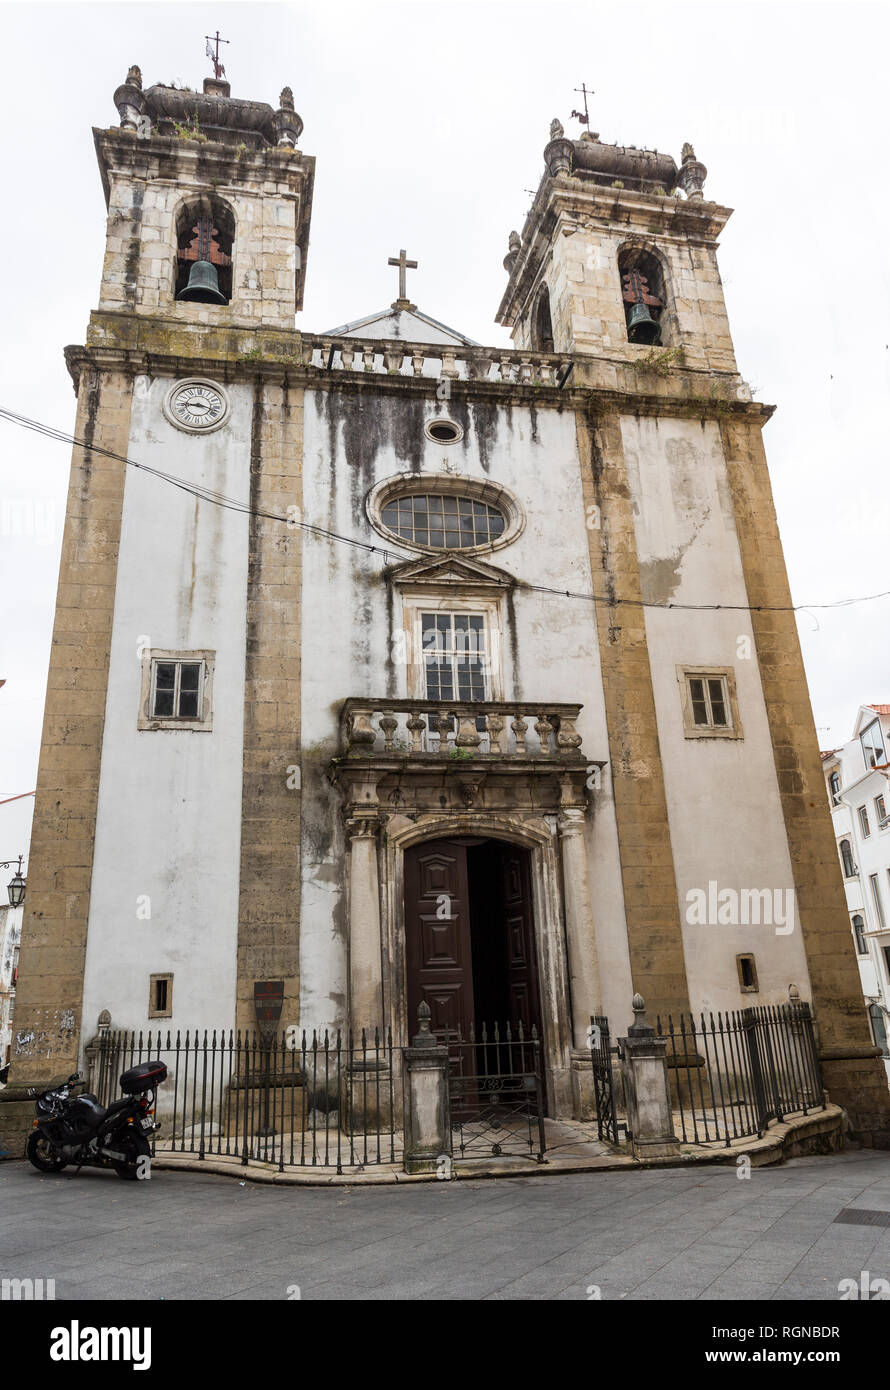 Facade of the actual Church of St Bartholomew, built in the 18th century in simple Baroque architecture with portal and two bell towers, in the histor Stock Photo